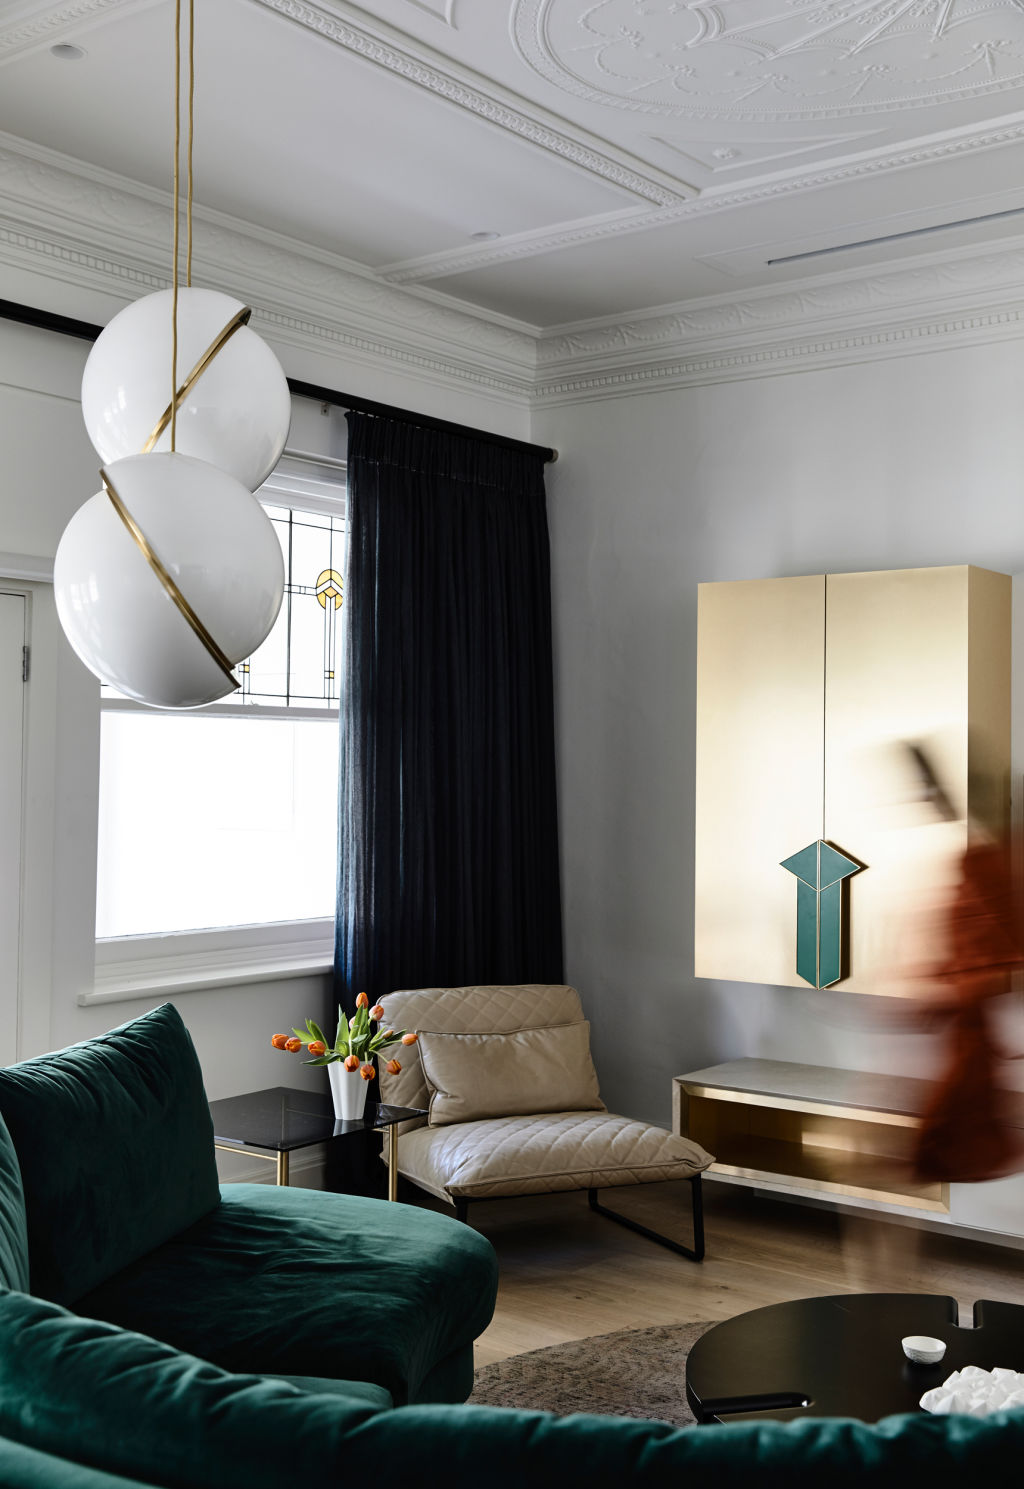 Doherty Design Studio have created a glamorous interior inspired by The Great Gatsby. Photo: Derek Swalwell.